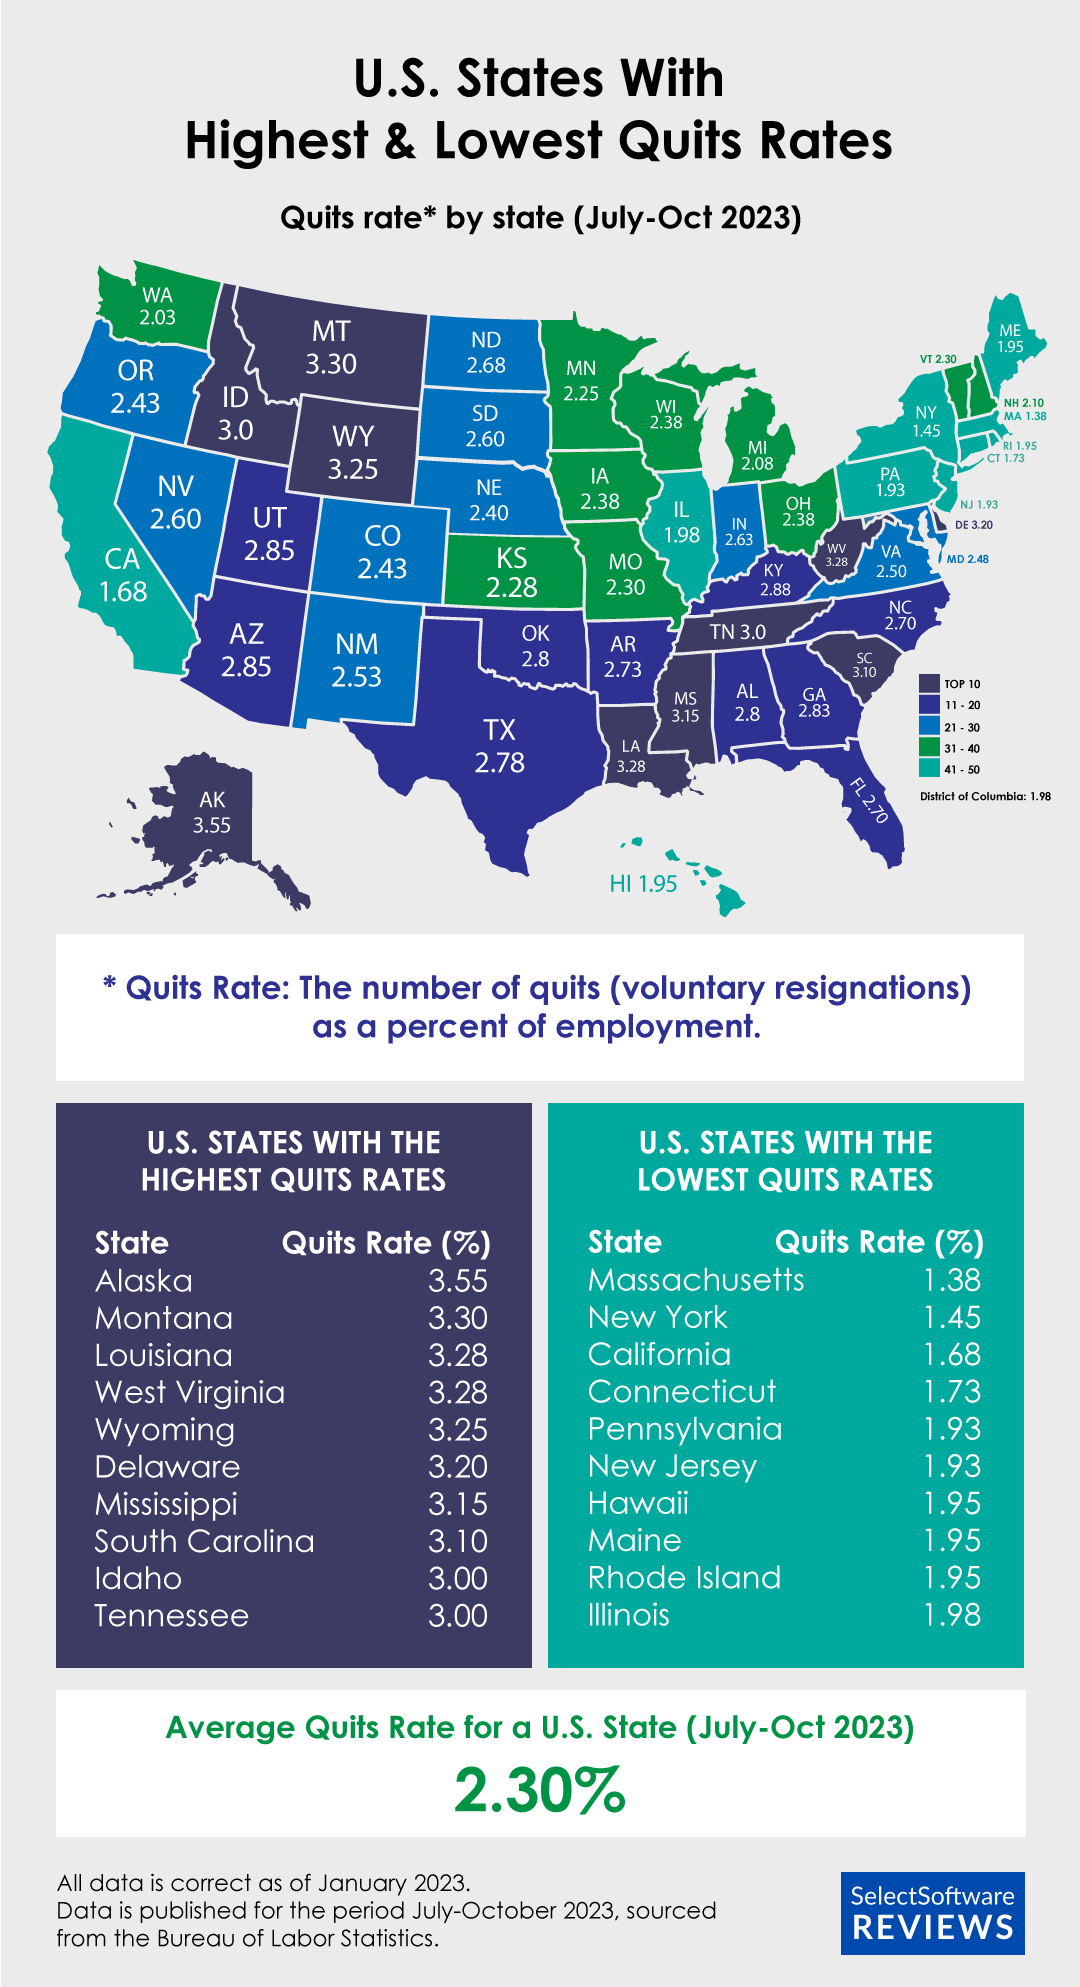 An infographic showing the U.S. states with the highest and lowest quits rate based on data from July to October 2023.